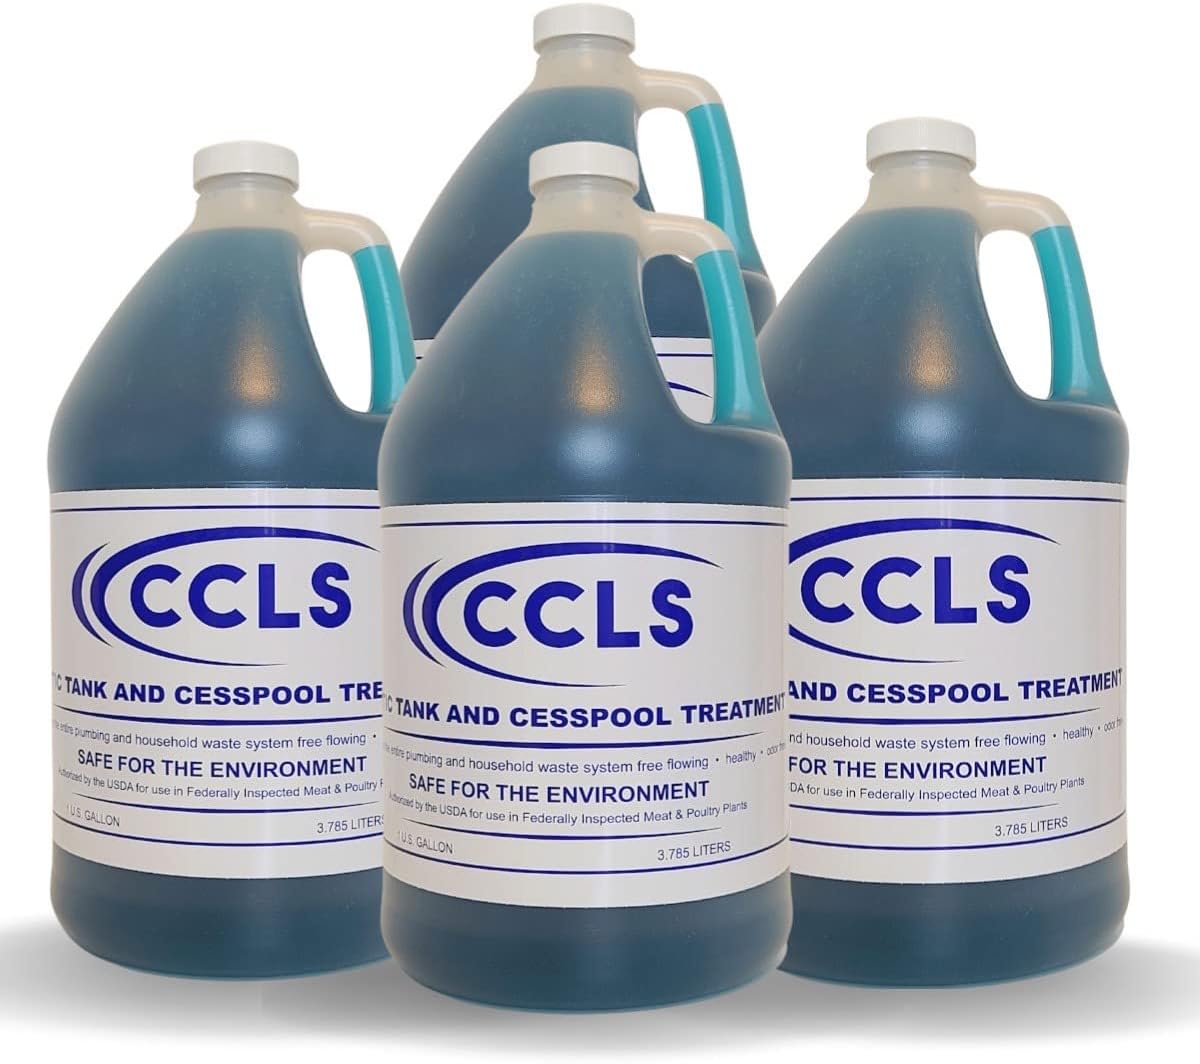 ccls Septic Tank and Cesspool Treatment [...]